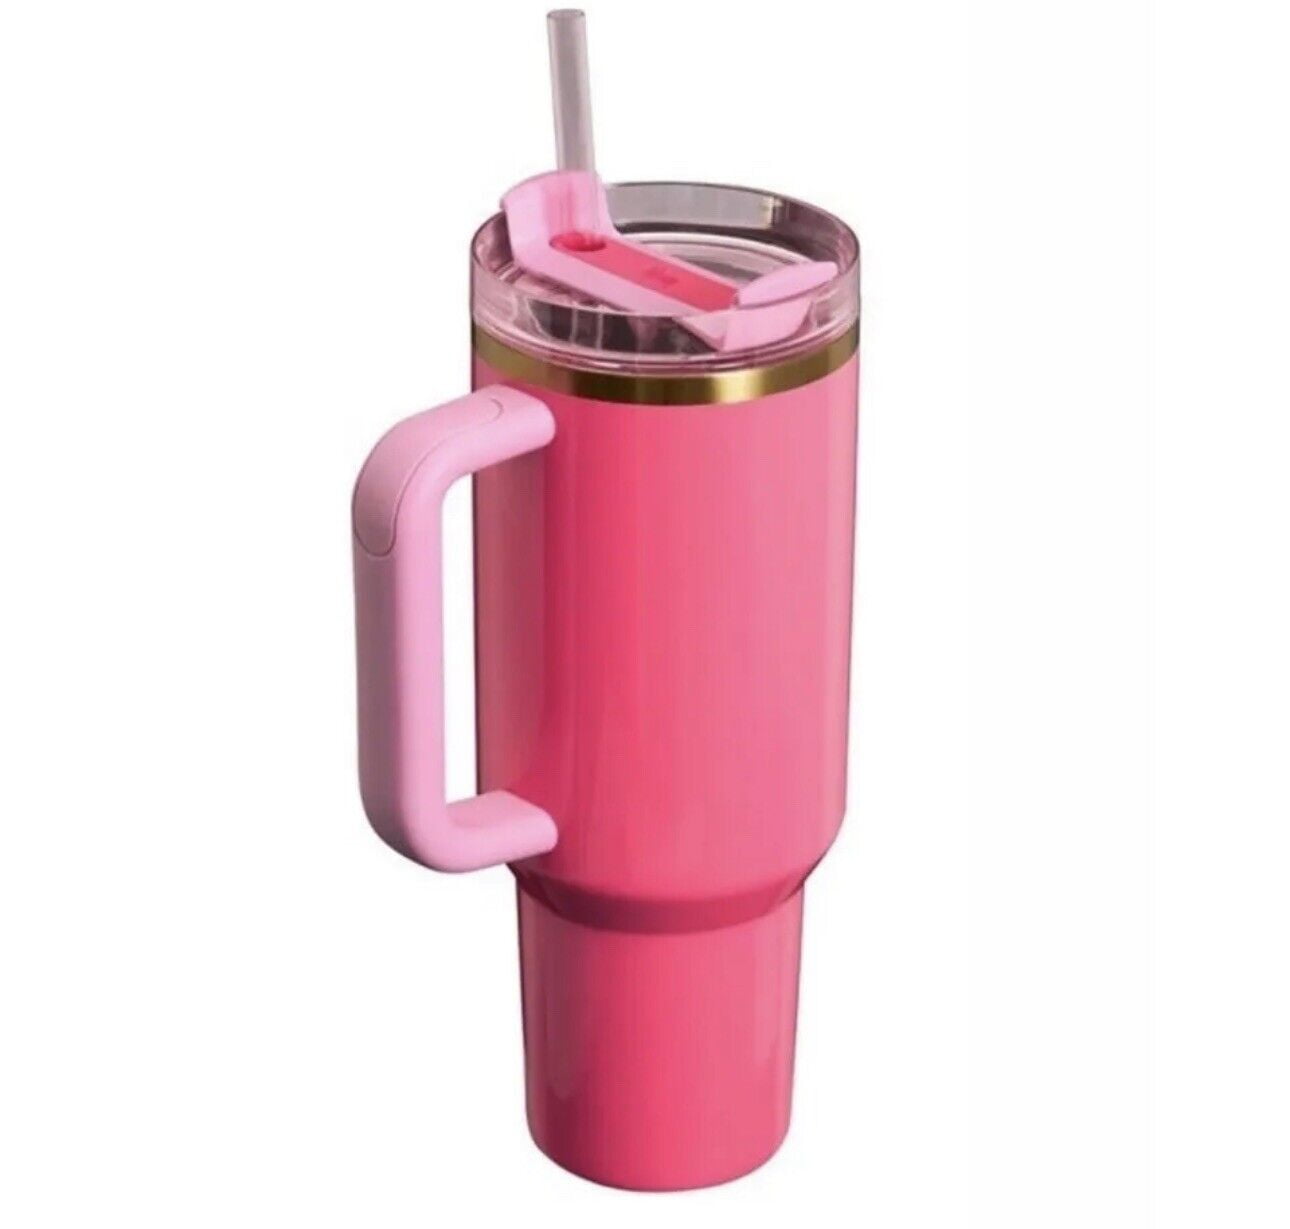 Cosmo Pink Parade 1:1 Stainless Steel Tumblers 40oz Adventure H2.0 Mug With  Lid And Straws For Holiday Travel From Promotionspace, $2.11